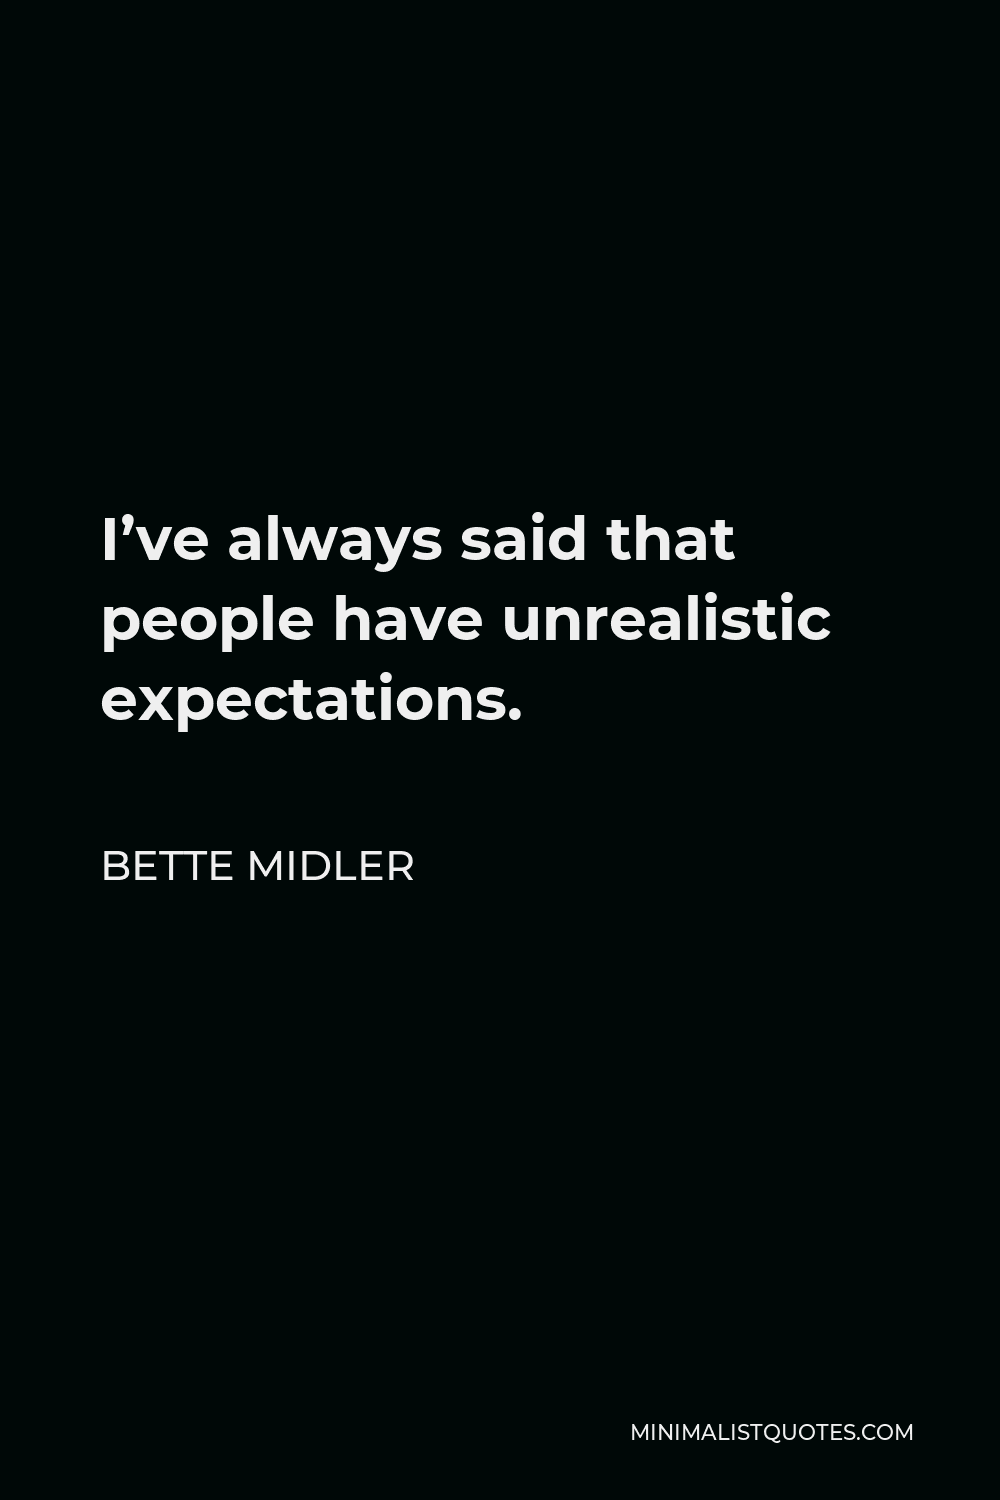 Bette Midler Quote - I’ve always said that people have unrealistic expectations.